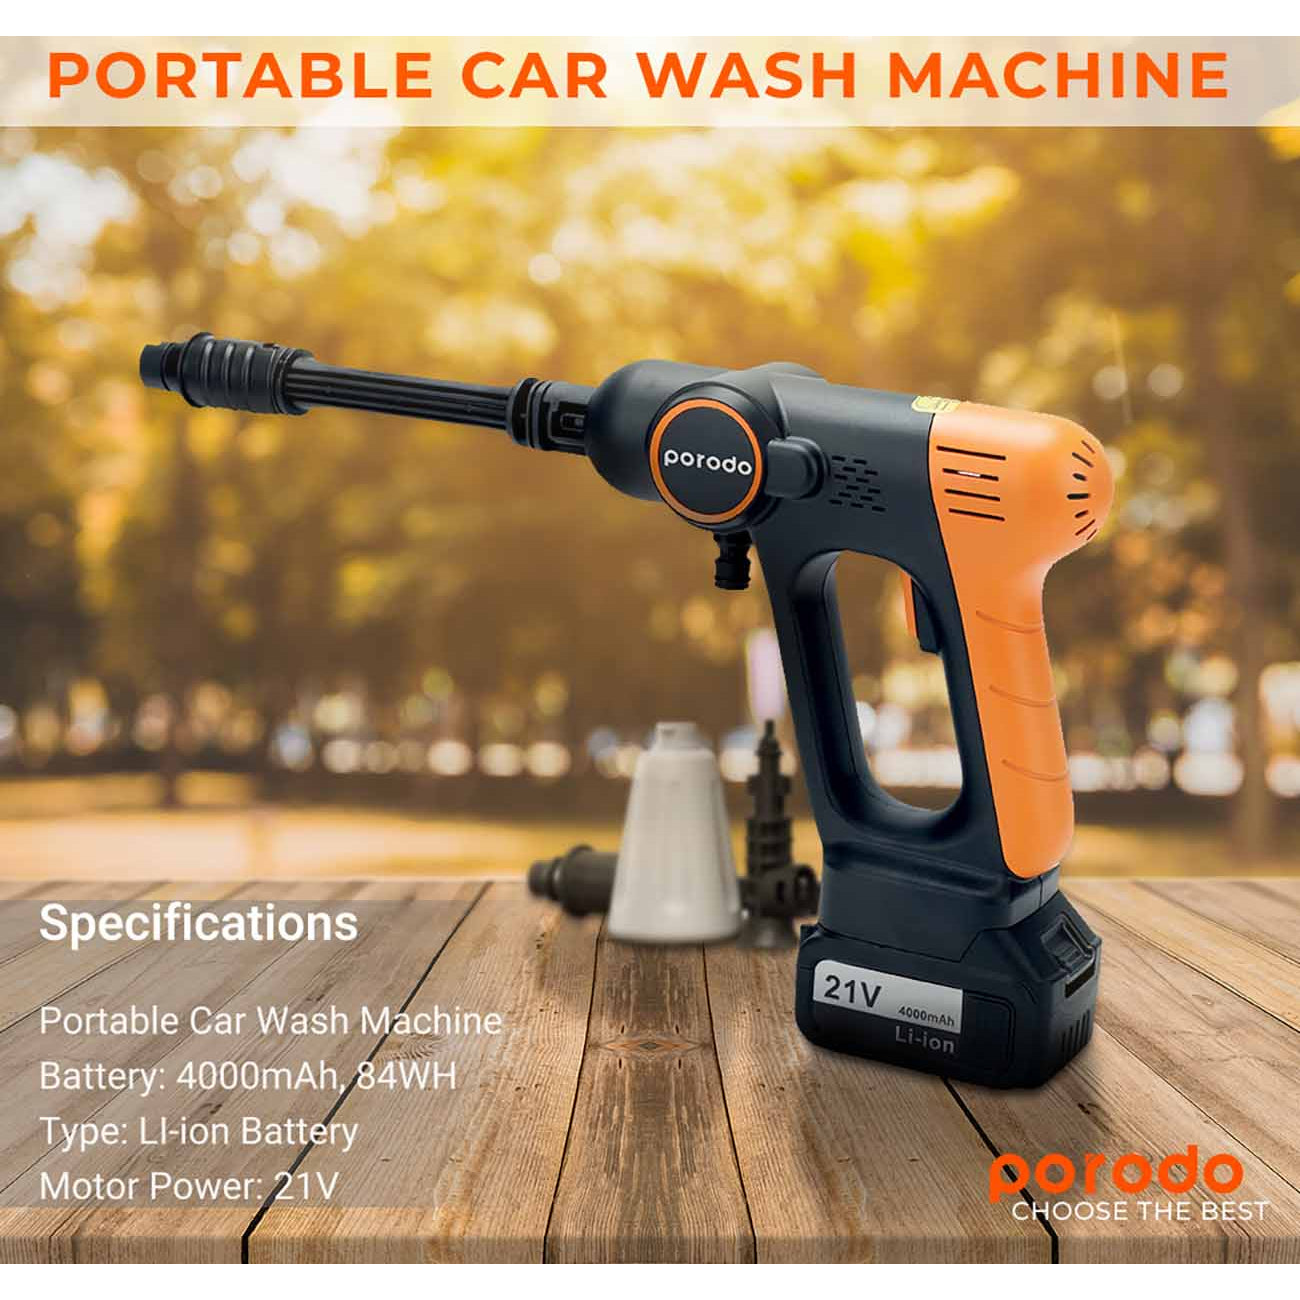 Porodo Car Wash Machine - Portable And Rechargeable